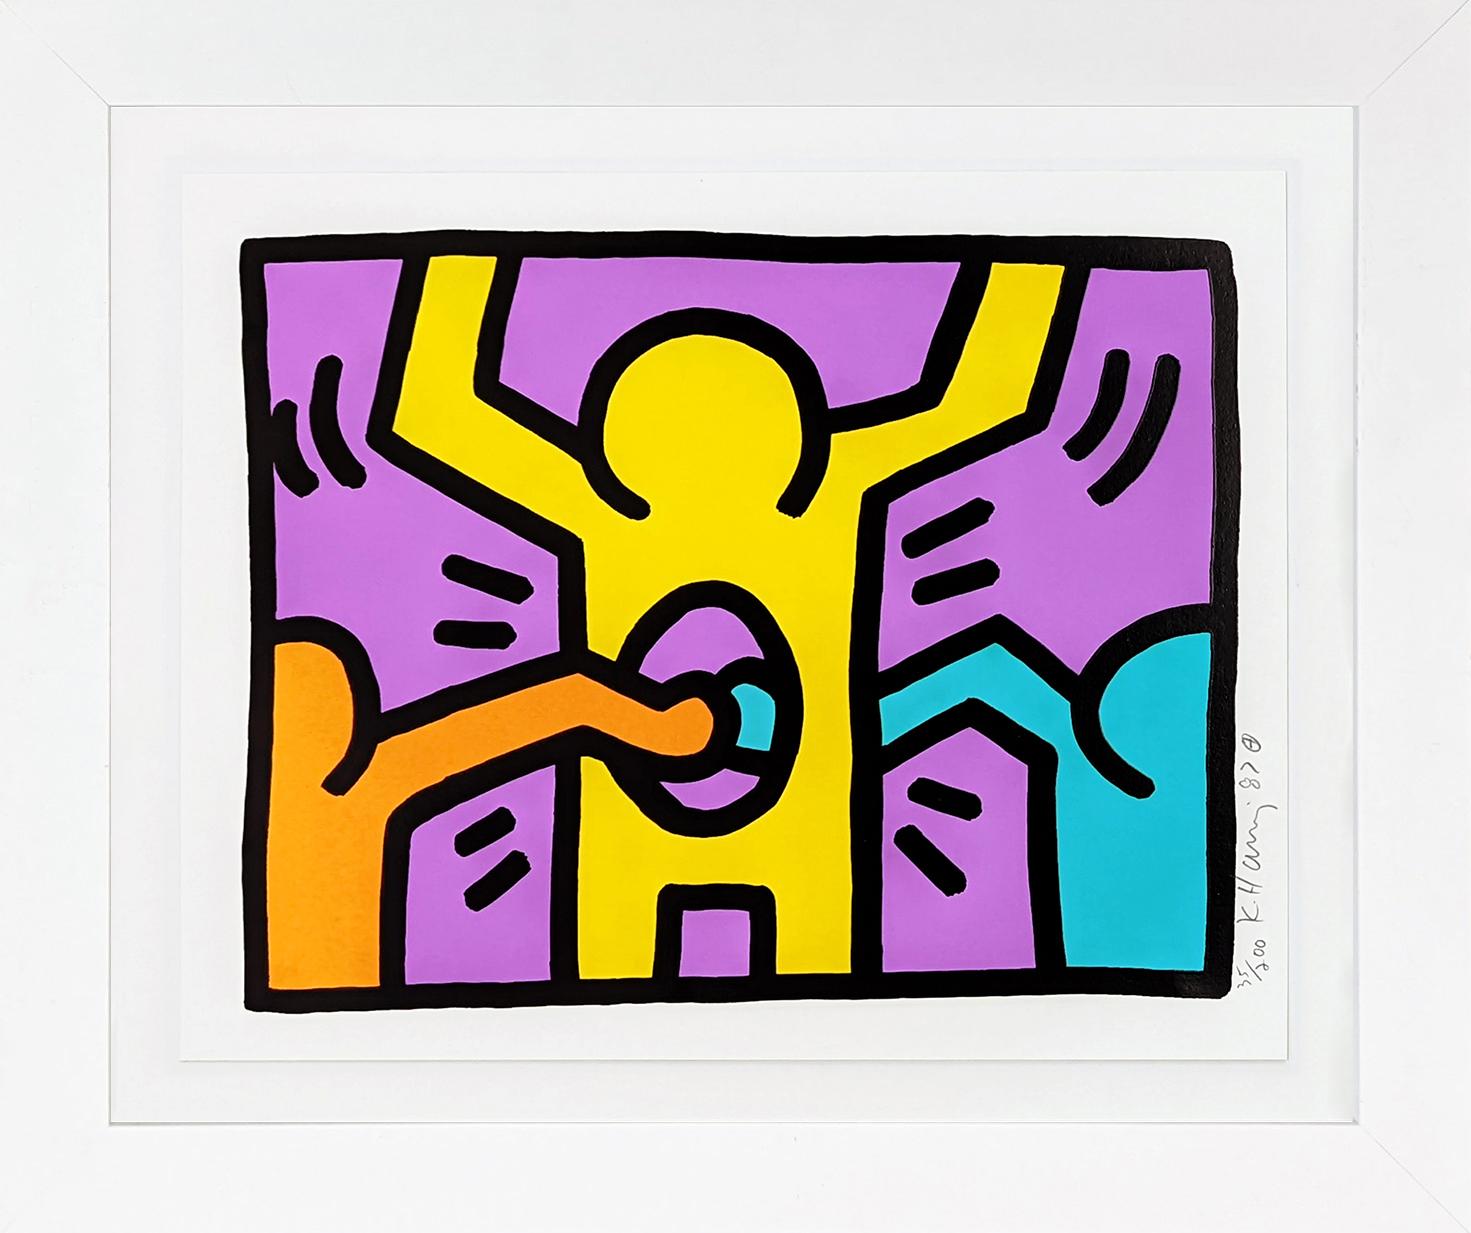 Keith Haring Portrait Print - "Untitled" from Pop Shop I